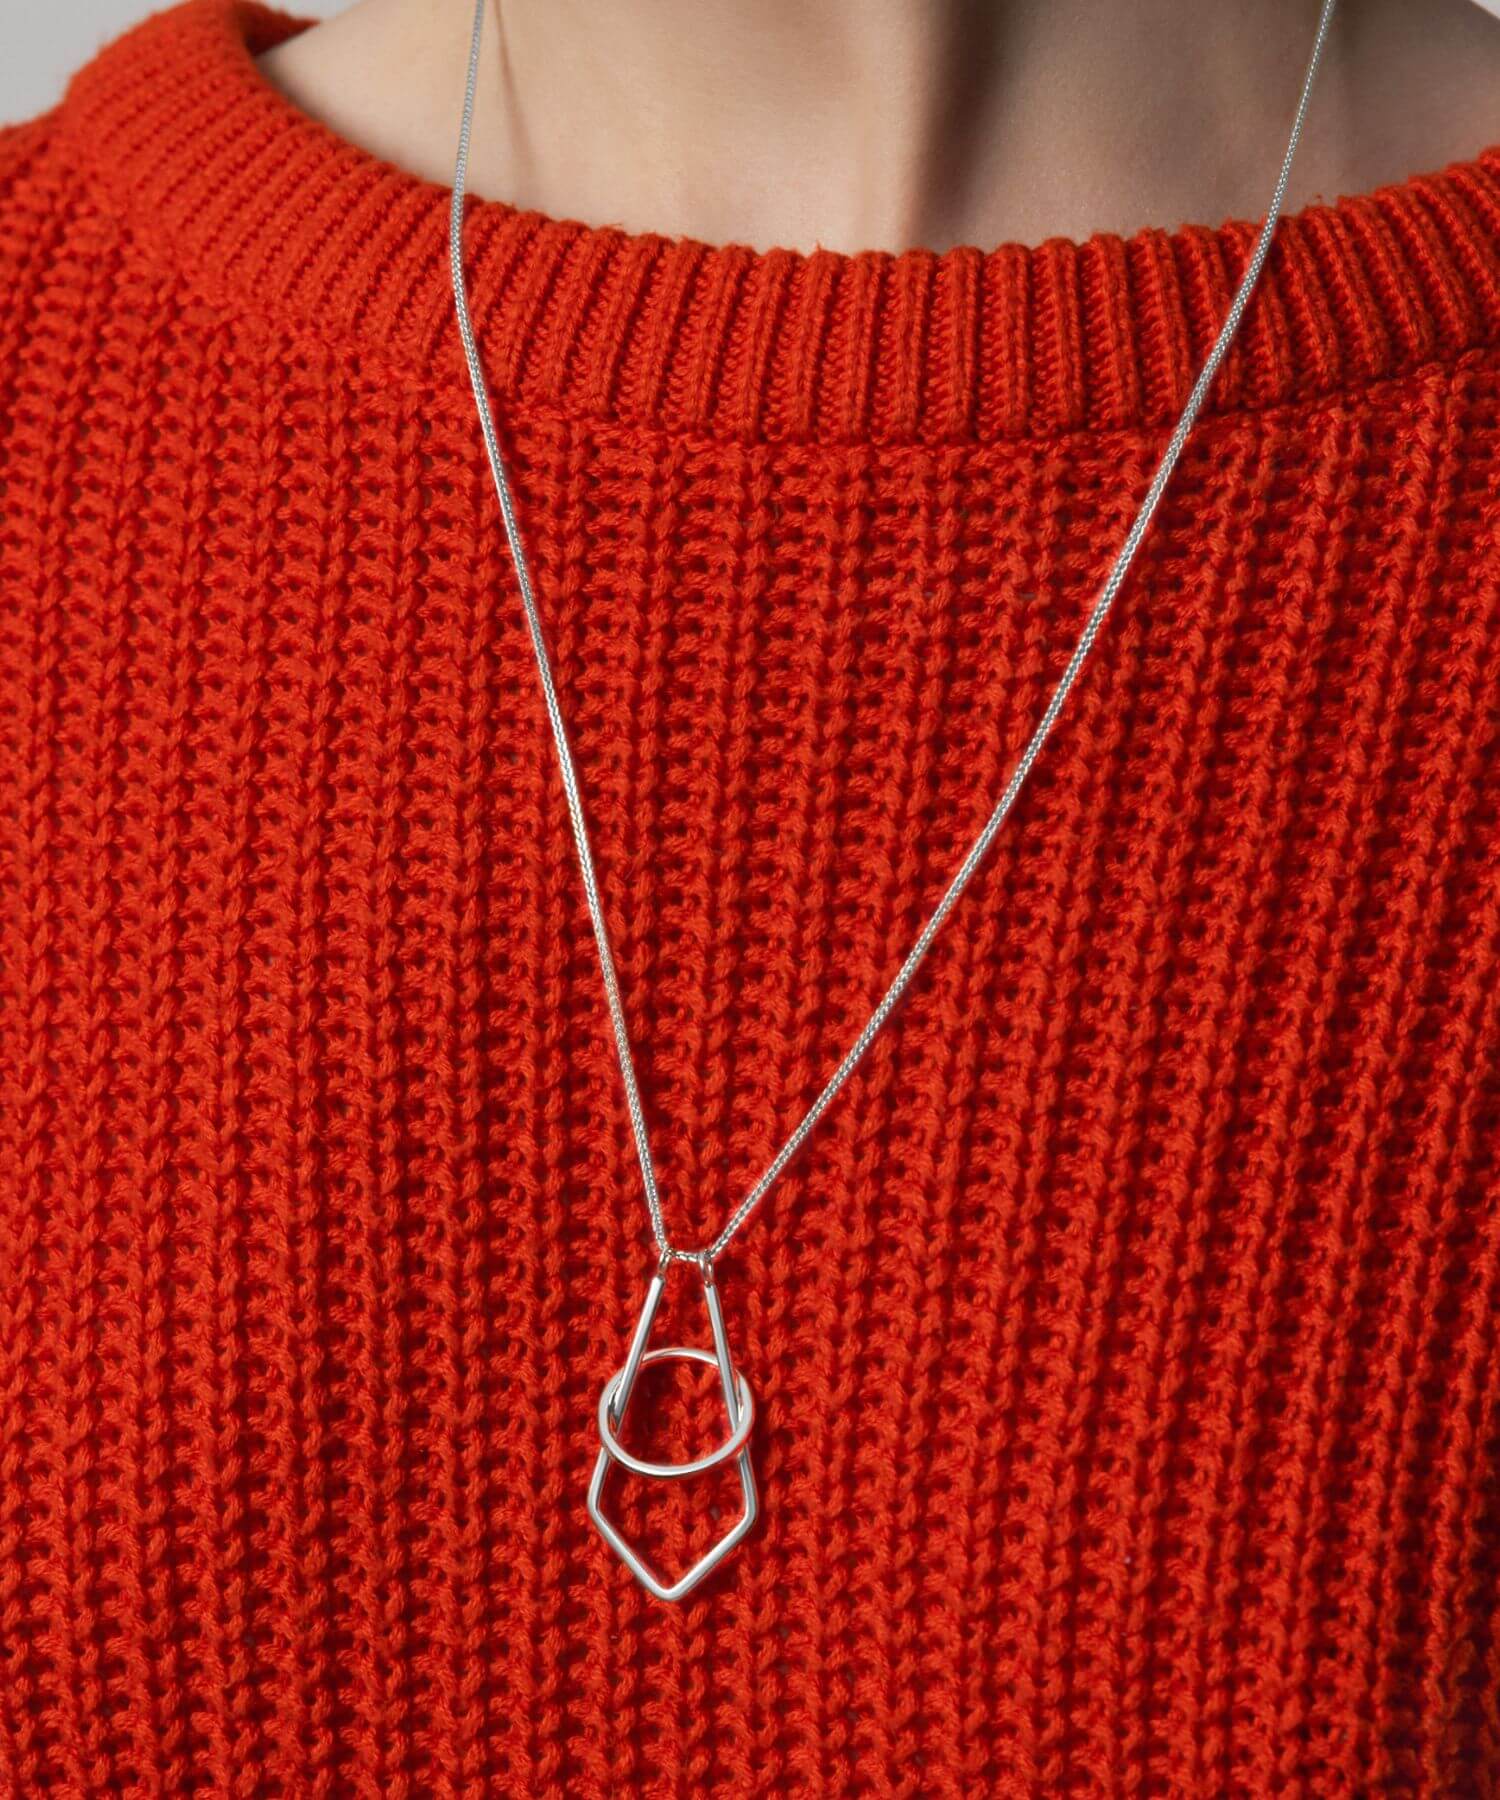 Wedding Ring On A Necklace 2024 | towncentervb.com